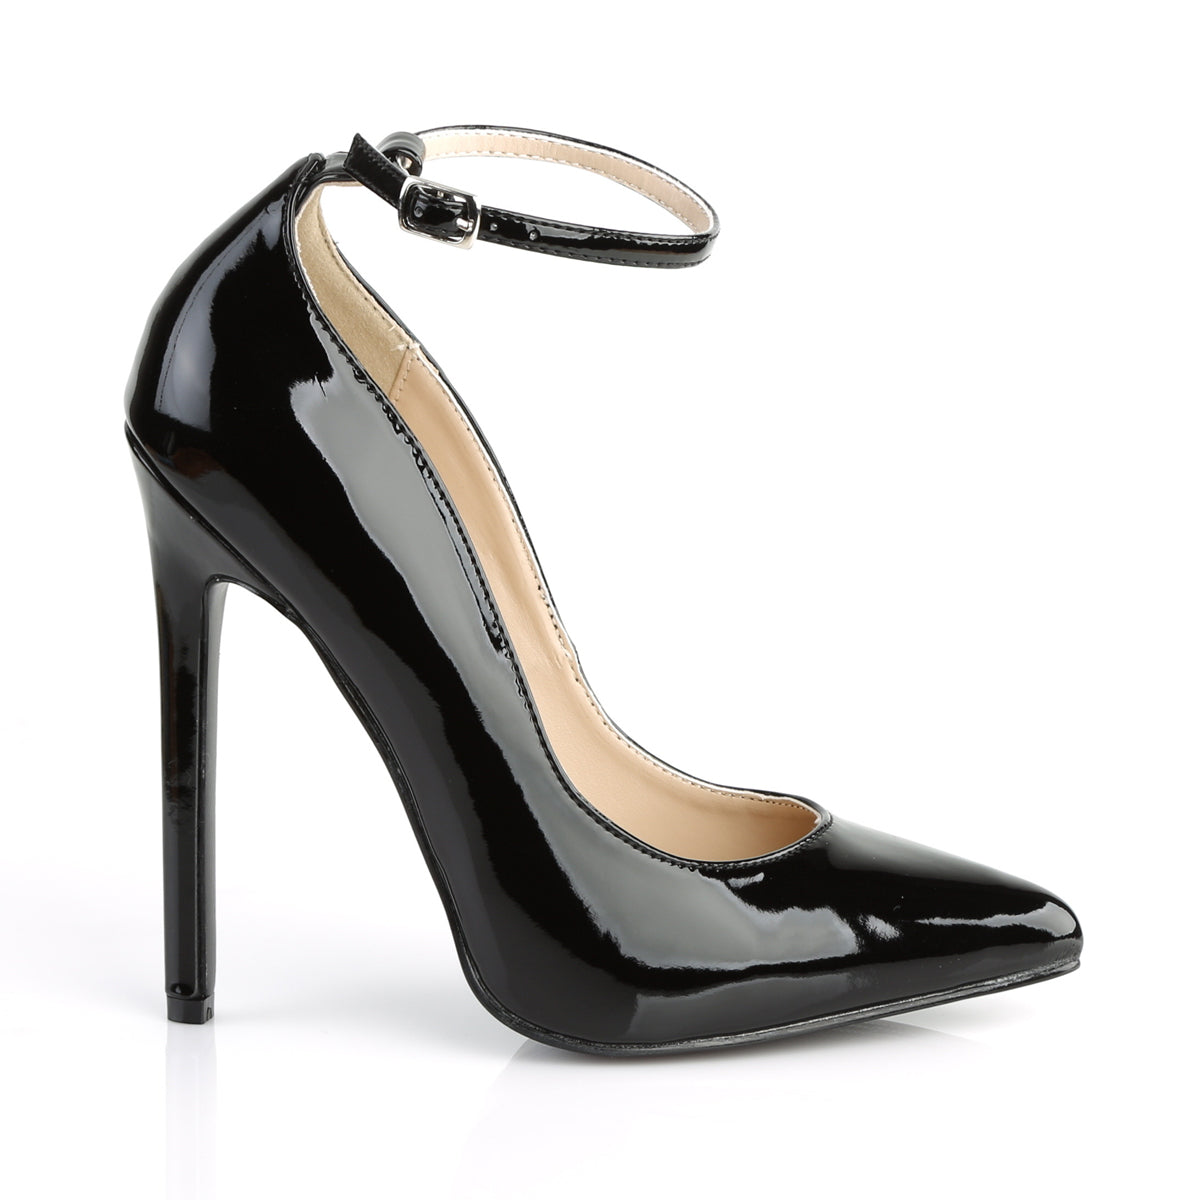 SEXY-23 Pleaser Shoes 5" Heel Black Patent Fetish Footwear-Pleaser- Sexy Shoes Fetish Heels